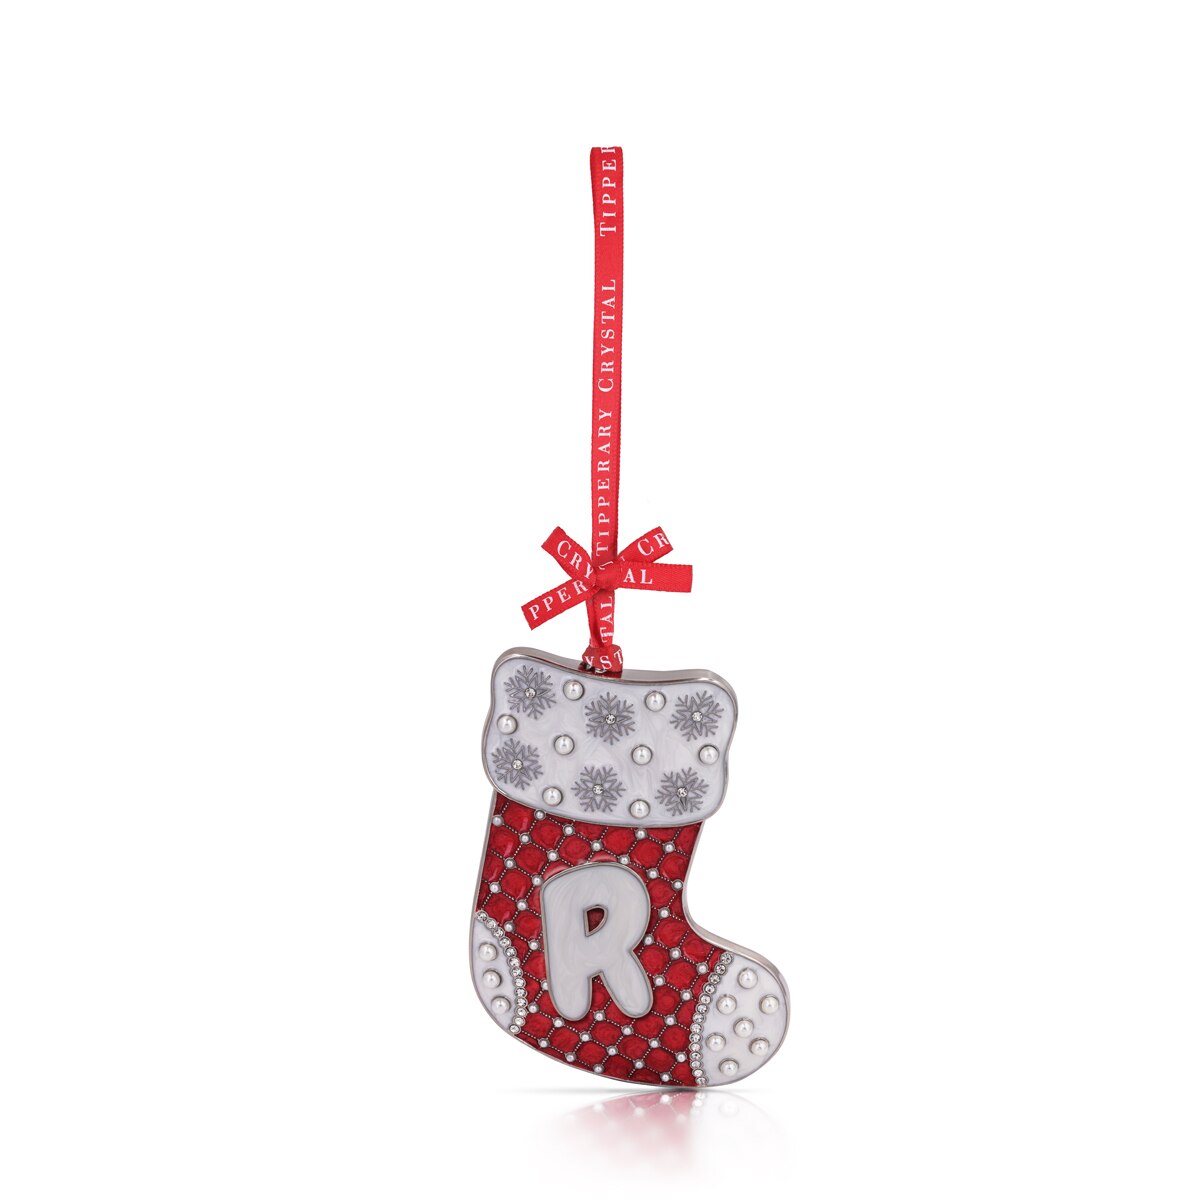 Tipperary Crystal Alphabet Stocking Christmas Decoration - R - Last chance to buy